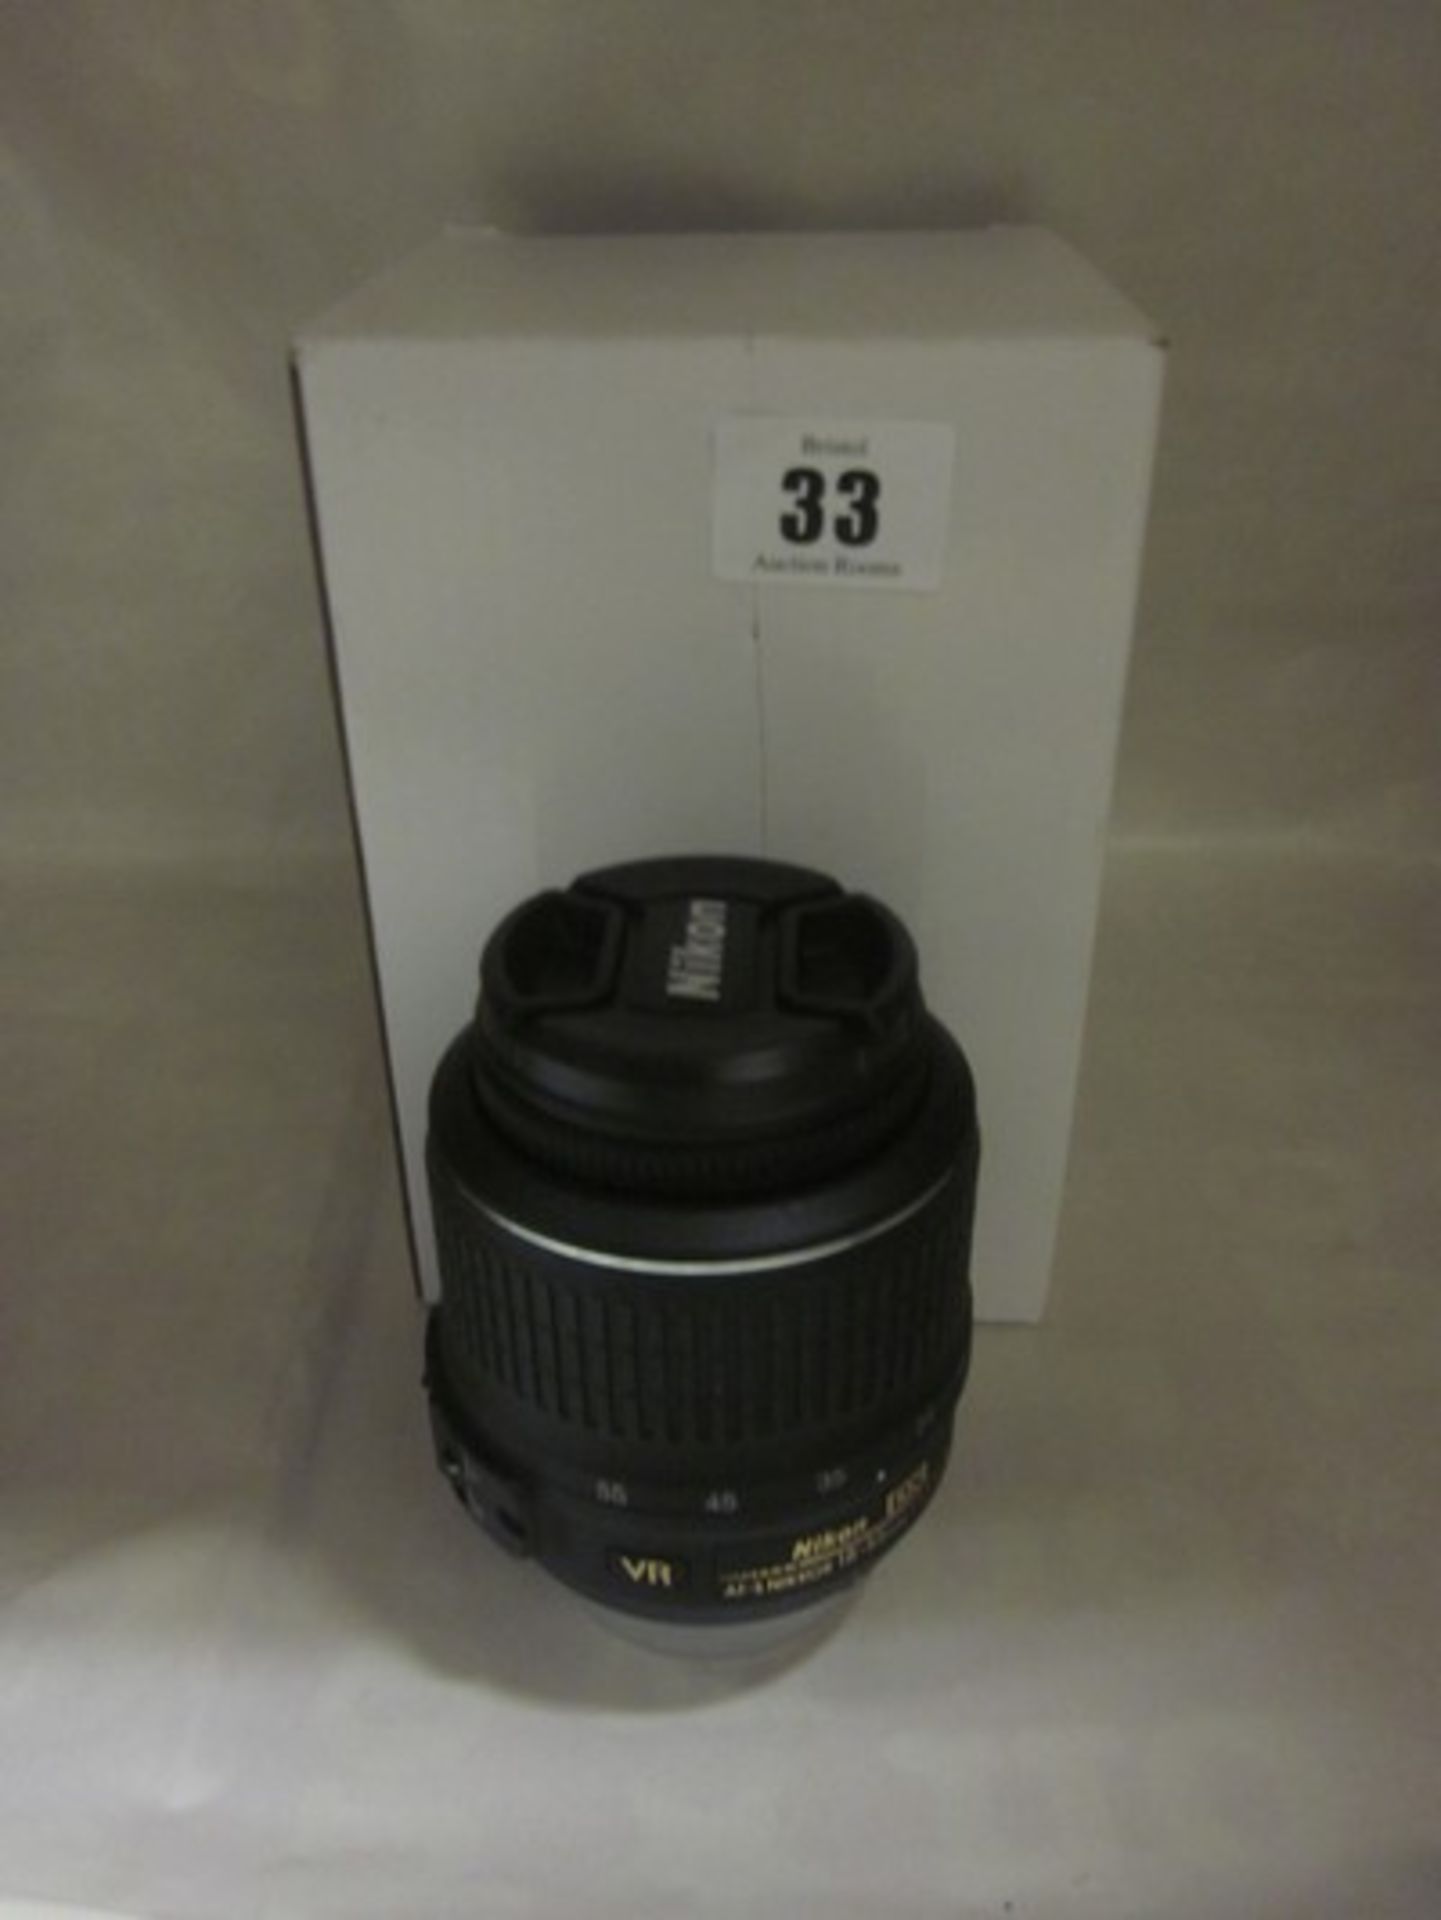 *A Nikon AF-S Nikkor 18-55mm 1:3.5-5.6G lens (As new).Payment and collection by 5pm Friday 15th